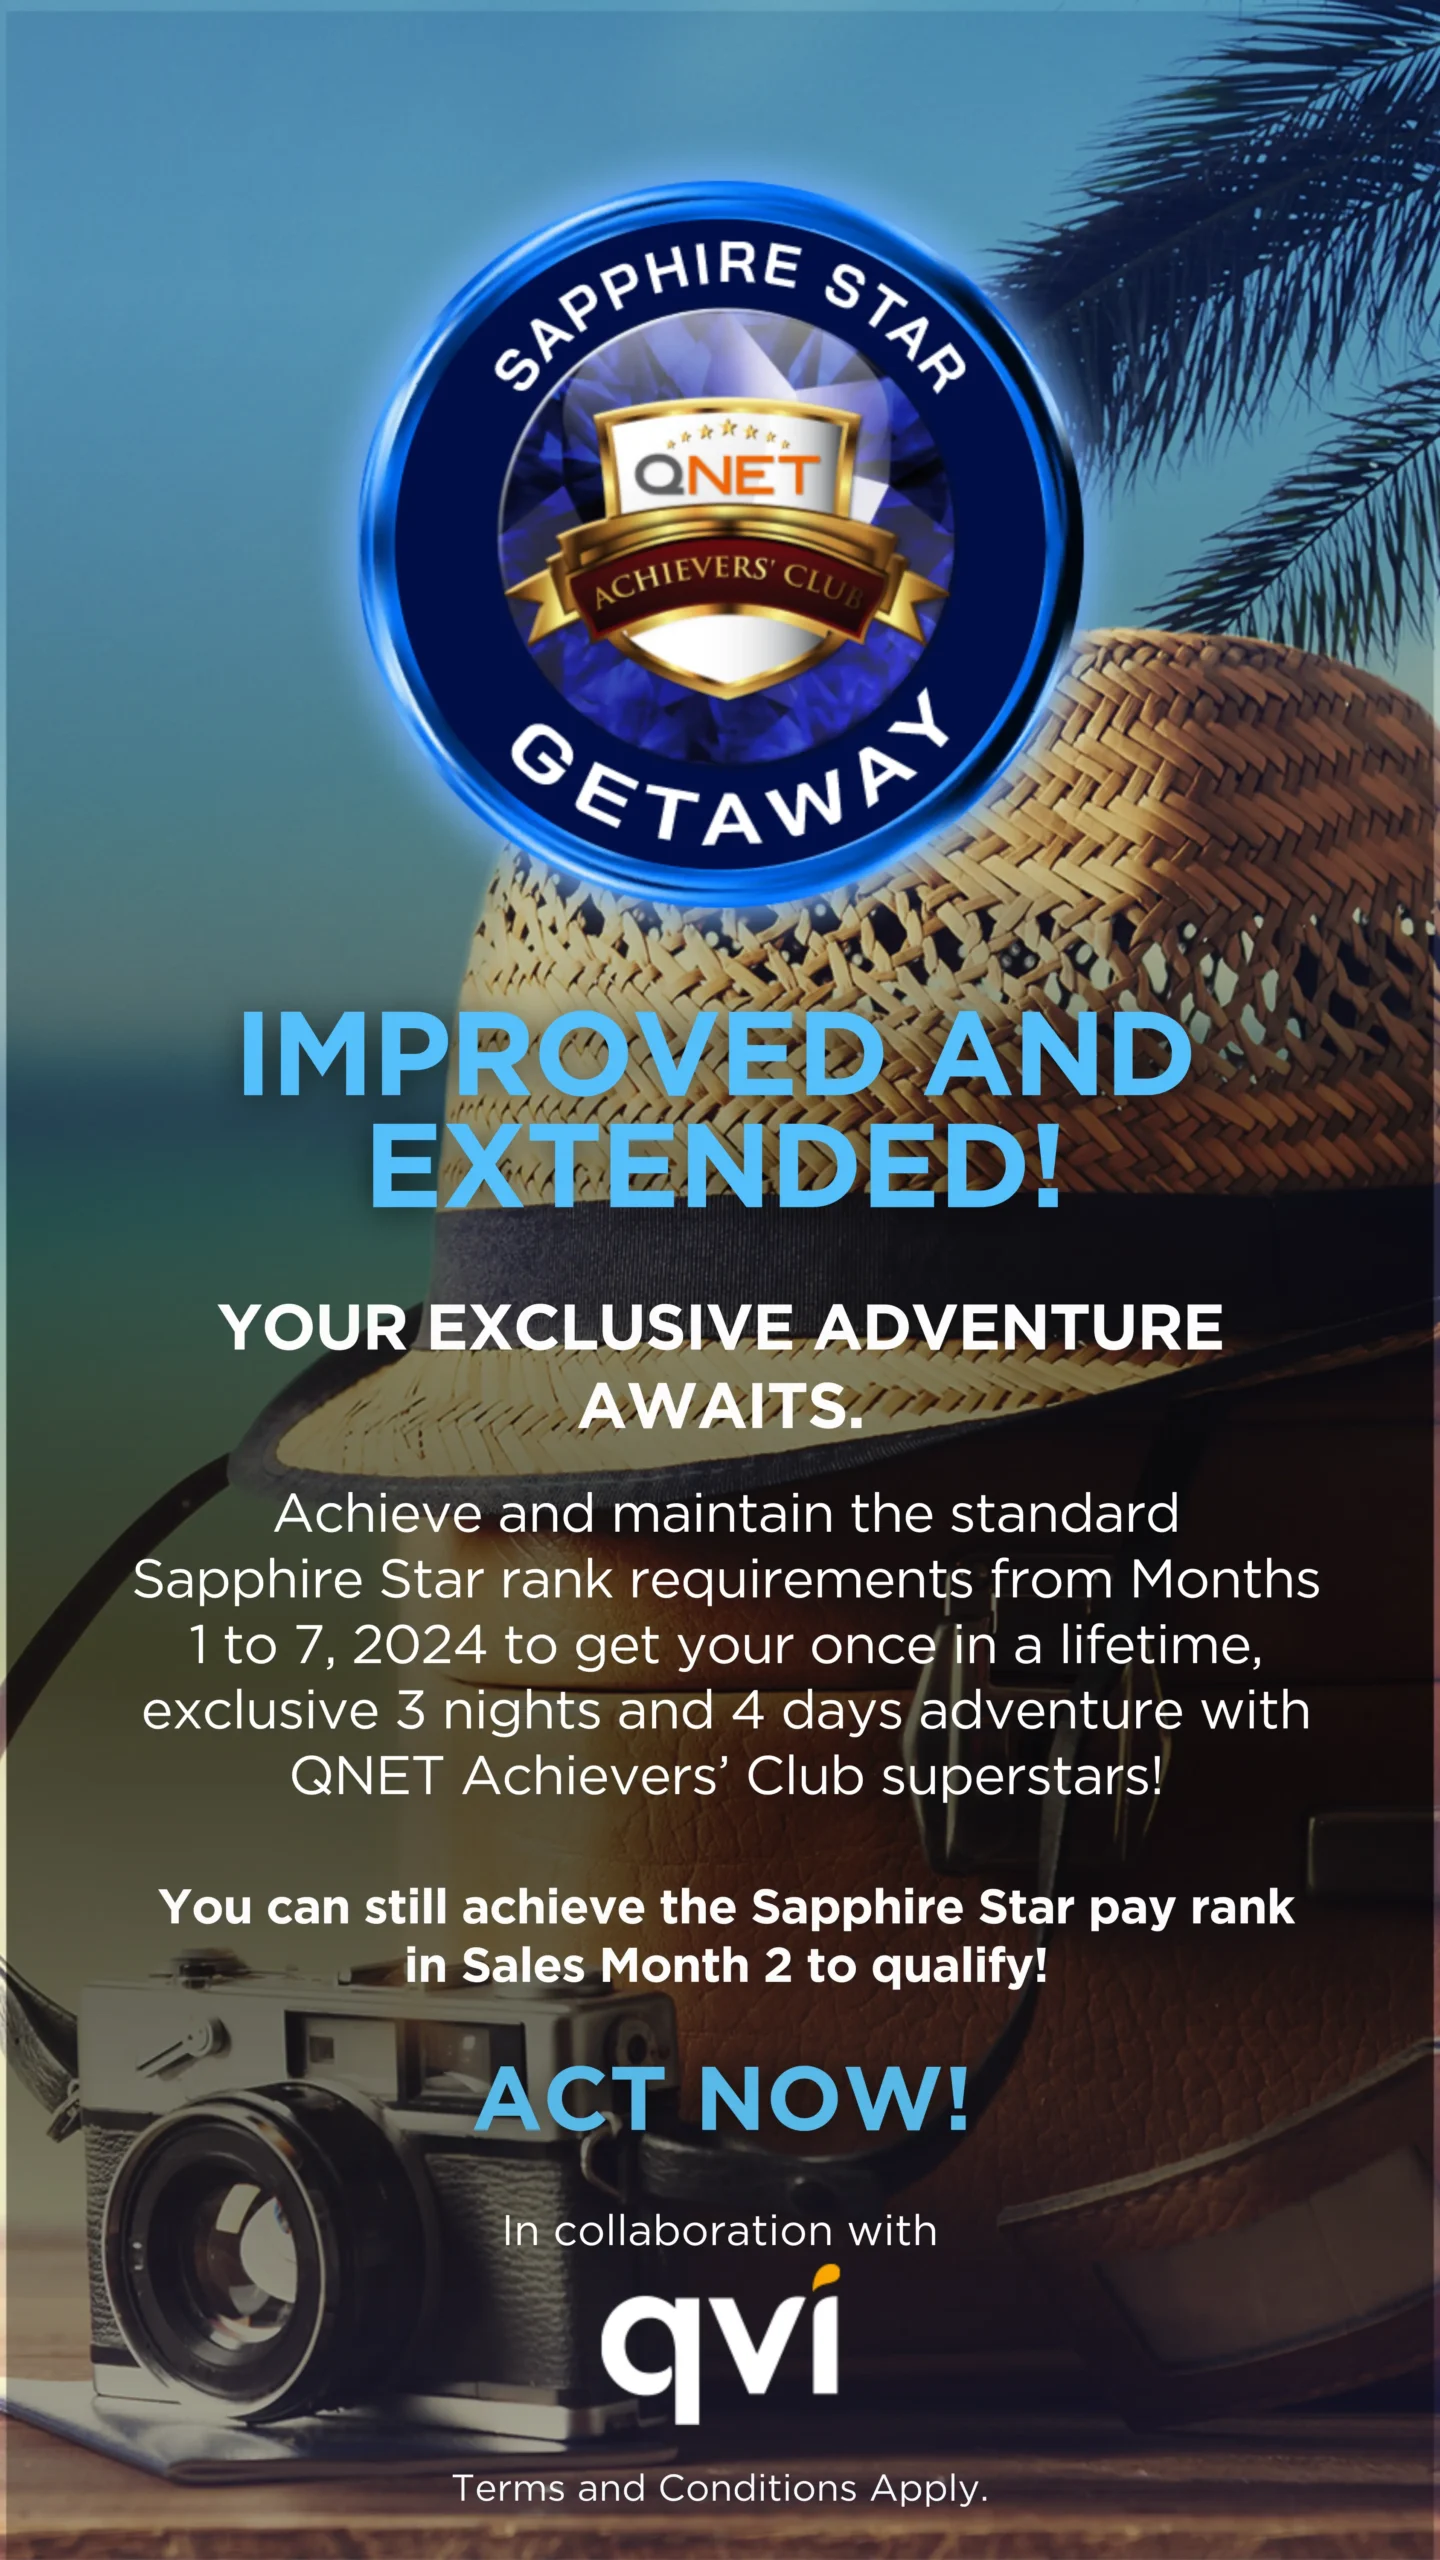 Updated Banner with the following message: The QNET Achievers' Club Sapphire Star Getaway Has Been Improved and Extended!

Your exclusive adventure awaits. Achieve and maintain the standard Sapphire Star rank requirements from Months 1 to 7, 2024, to get your once in a lifetime exclusive 3 nights 4 days adventure with QNET Achievers' Club superstars! 

You can still achieve the Sapphire Star pay rank in Sales Month 2 to qualify, so act now.